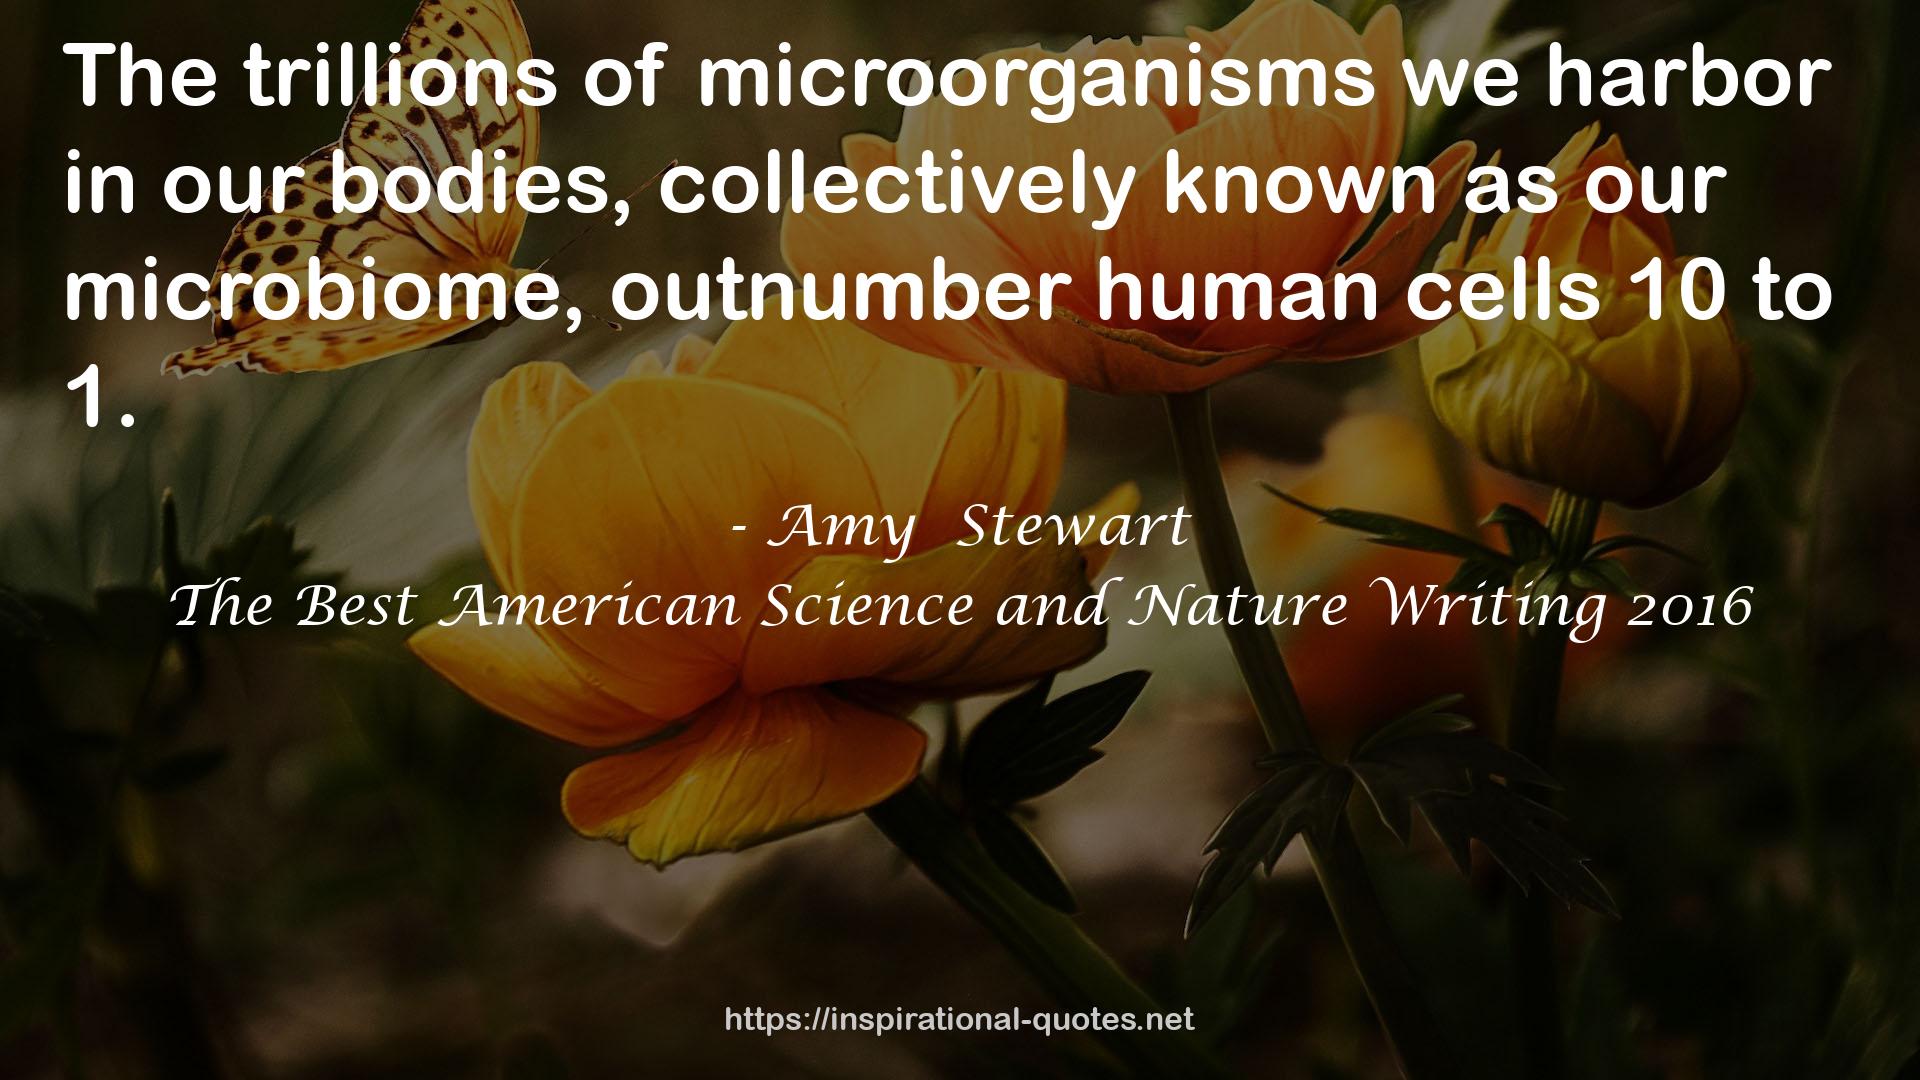 The Best American Science and Nature Writing 2016 QUOTES